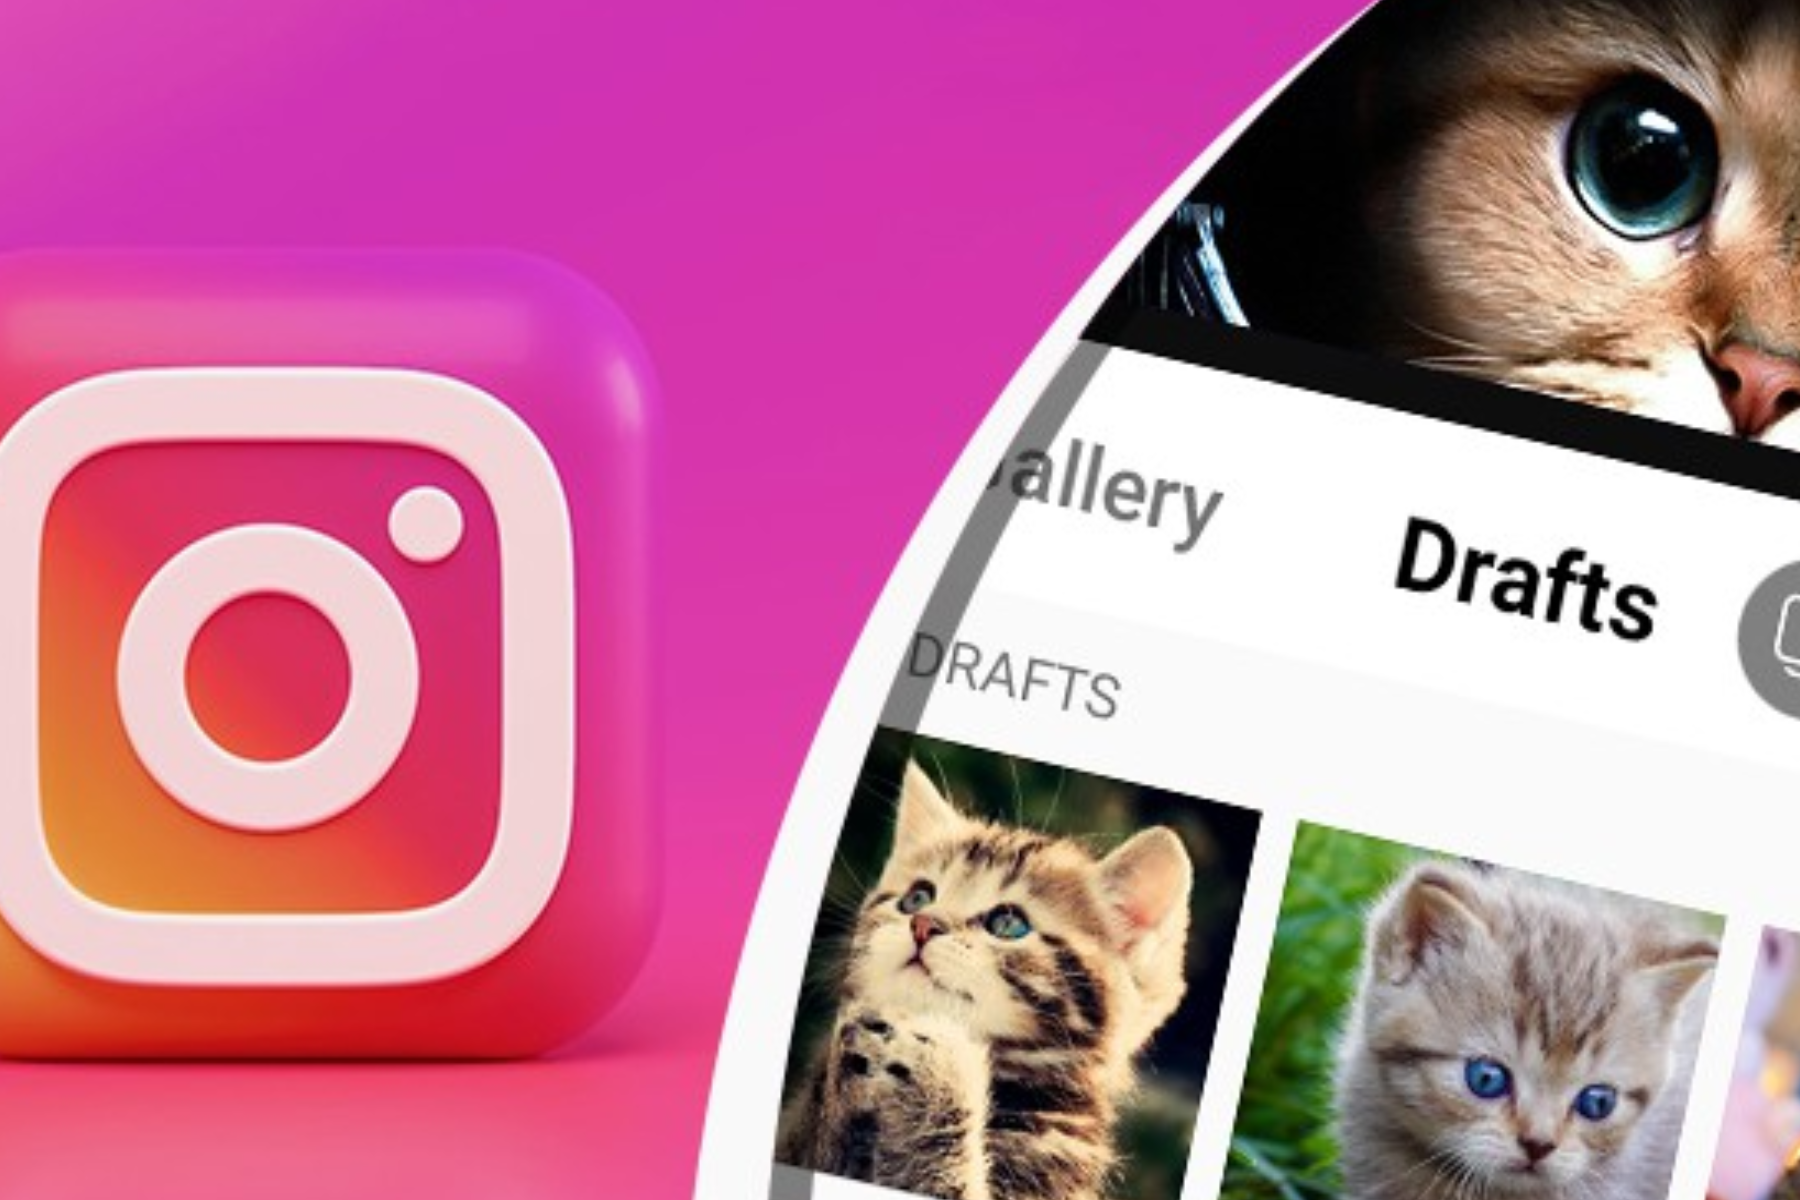 Follow These Steps On How To Find Drafts On Instagram